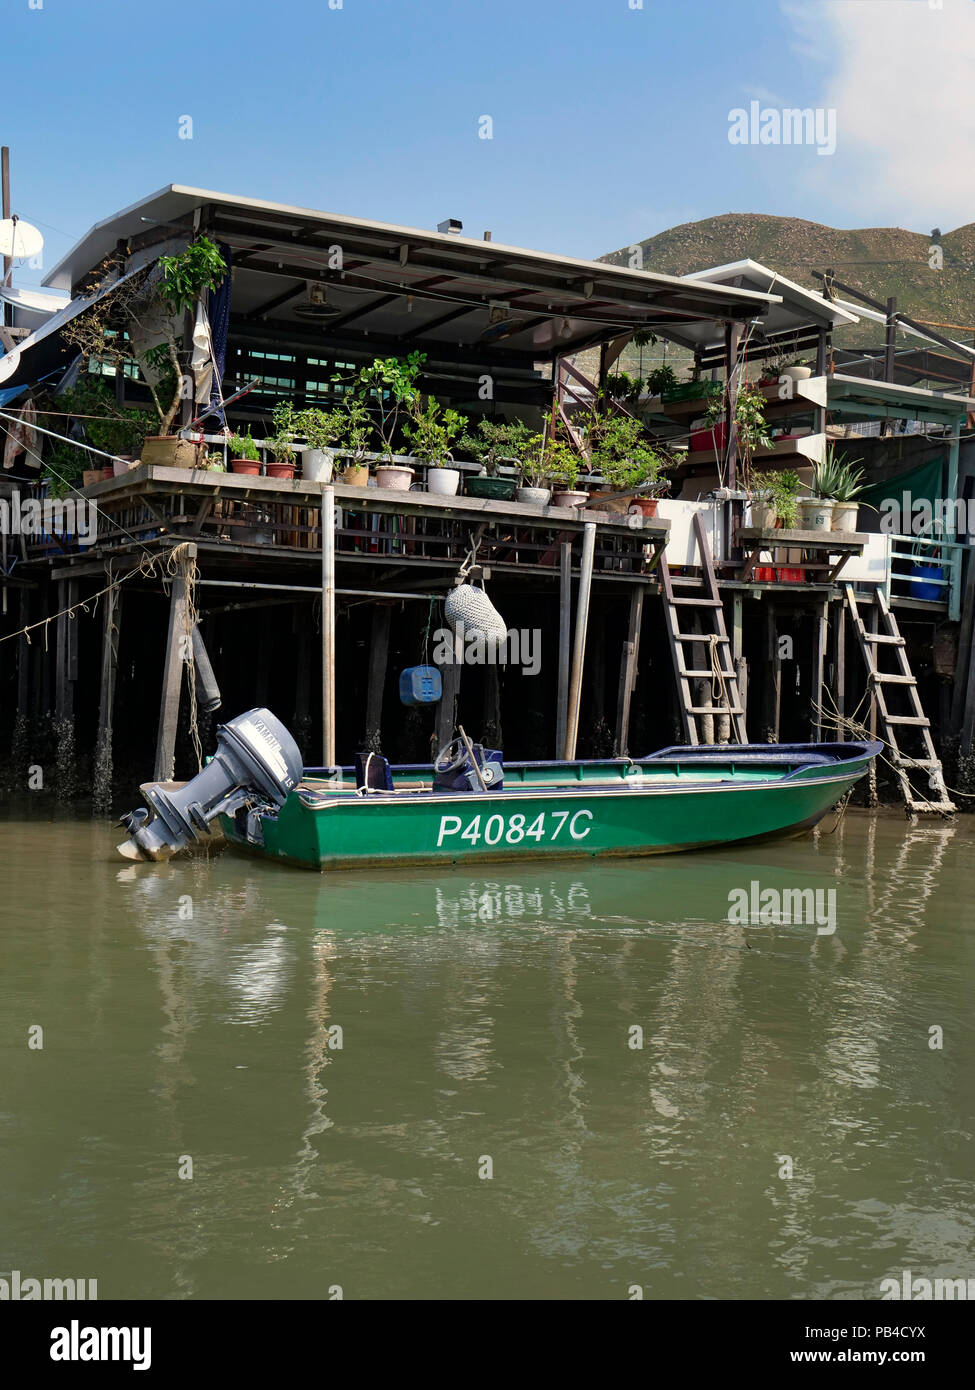 The fishing village and stilt houses of Tai O from the water, western Lantau Island, Hong Kong Stock Photo